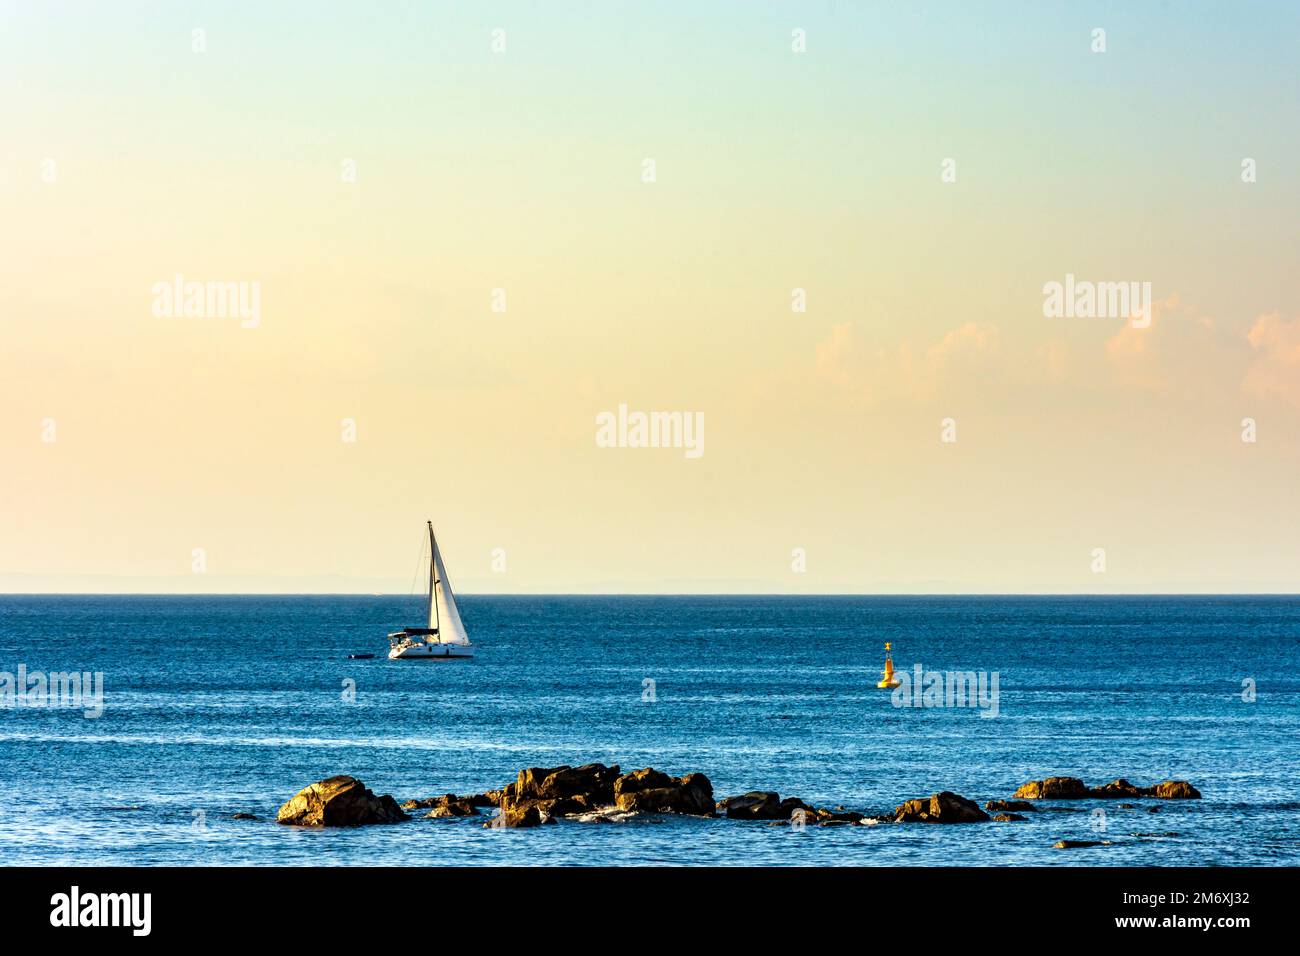 Sailing boat sailing over the calm waters of All Saints Bay Stock Photo